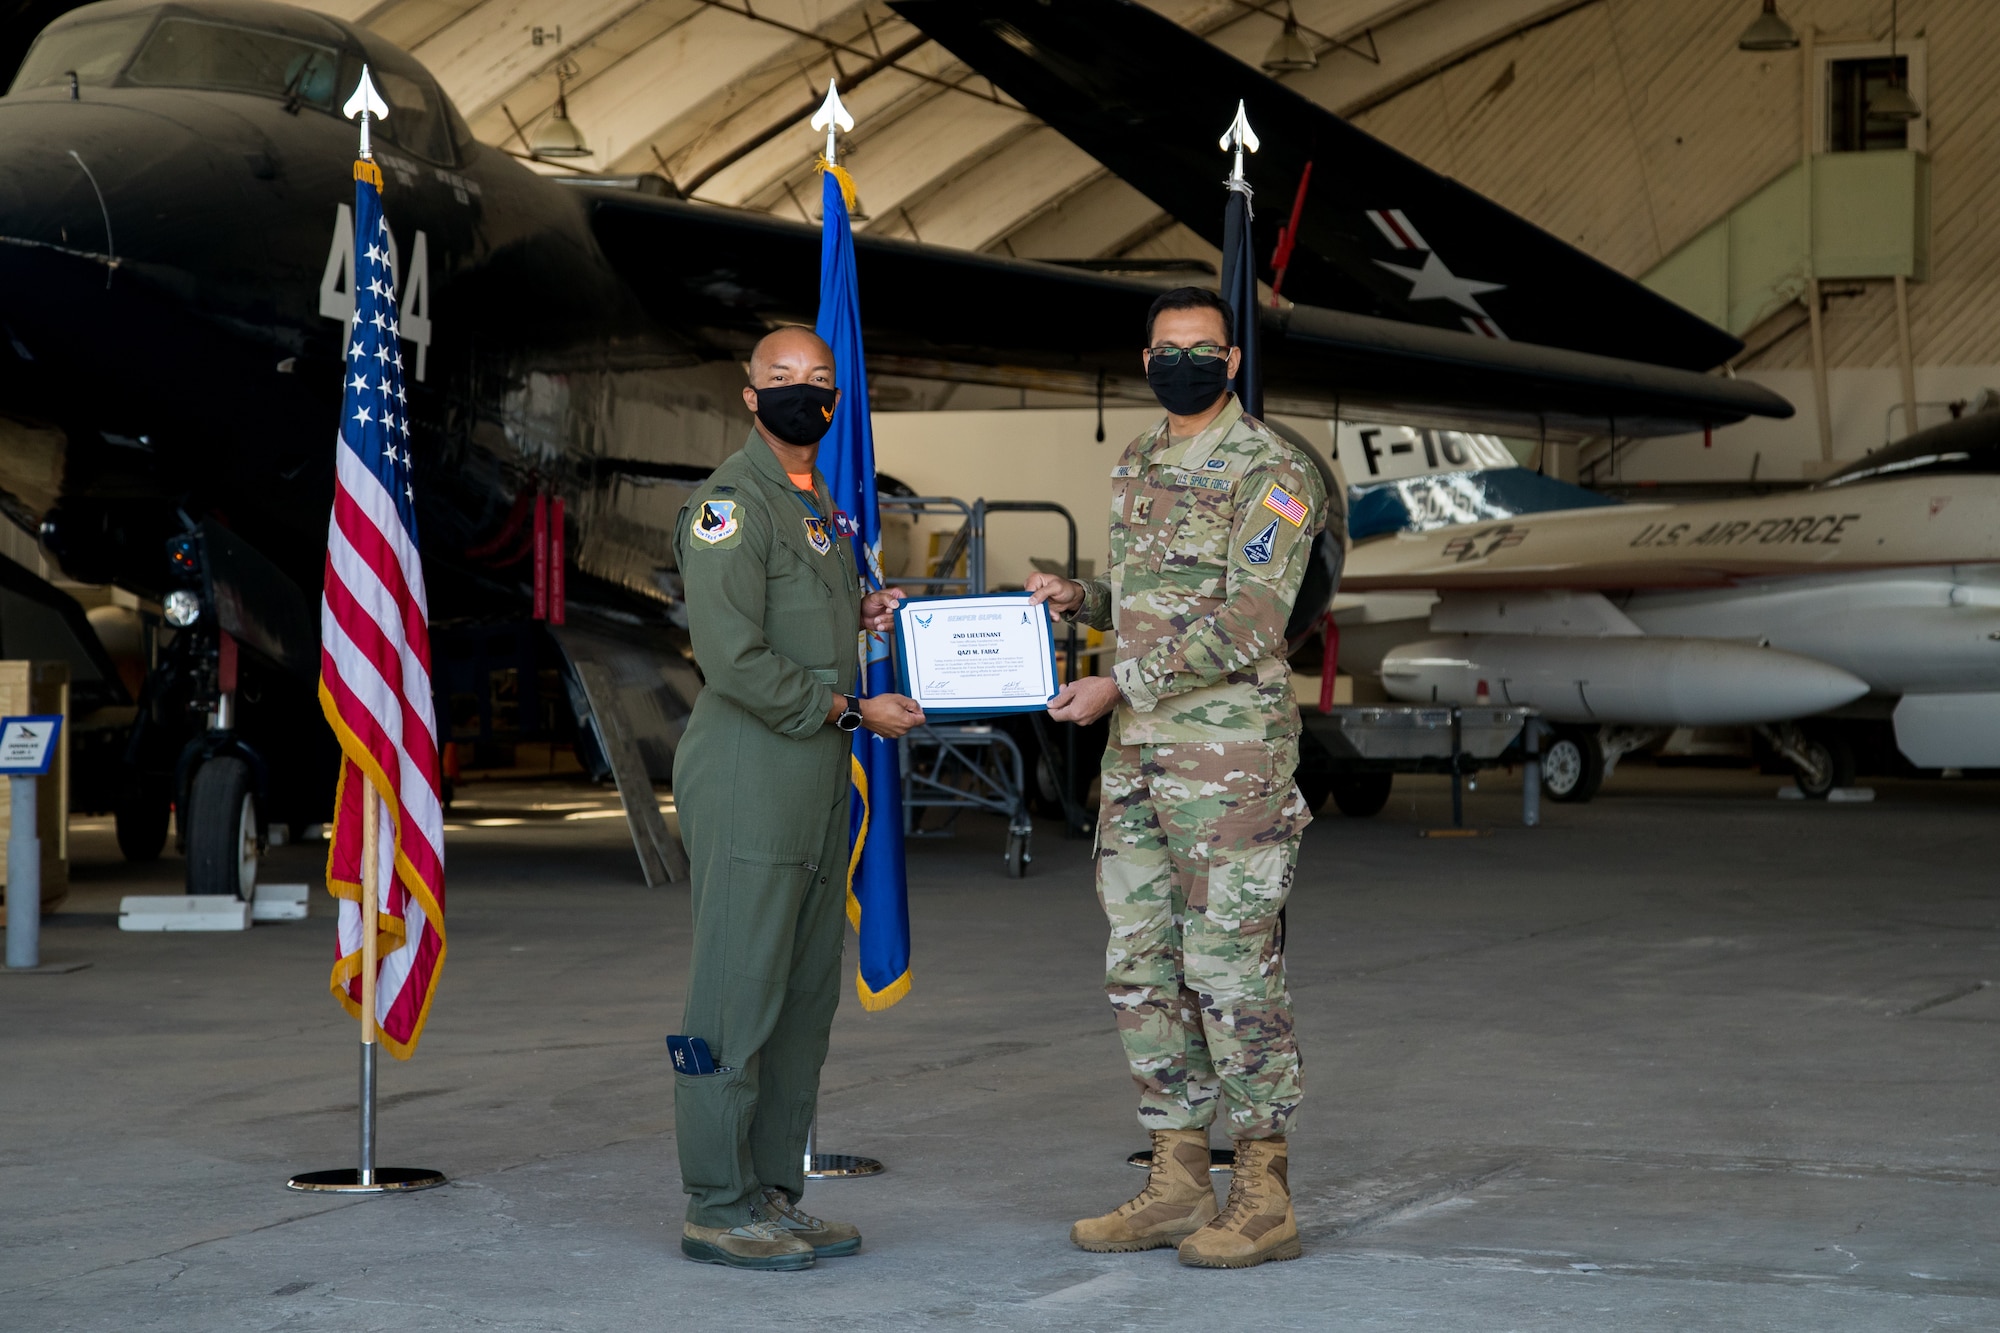 2nd Lt. Qazi Faraz, 773rd Test Squadron, originally of Houston, Texas, accepts his U.S. Space Force certificate from Col. Randel Gordon, 412th Test Wing Vice Commander, during a Space Force Transfer Ceremony at Edwards Air Force Base, California, Feb. 11. (Air Force photo by Richard Gonzales)